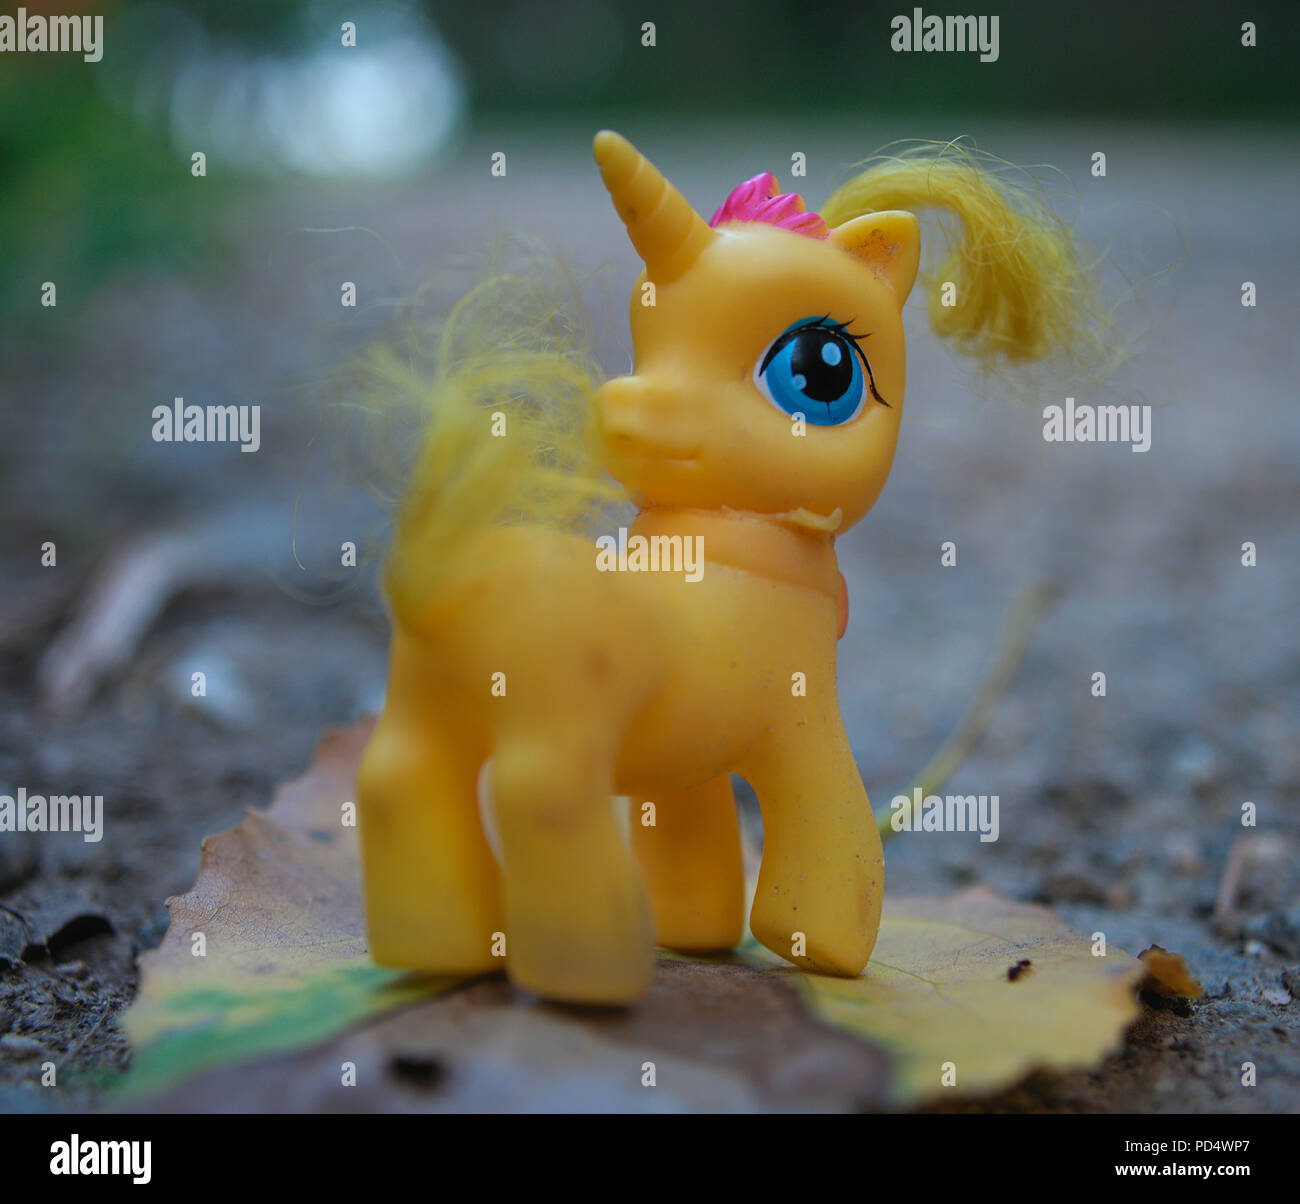 Yellow toy unicorn standing on leaf at forest road Stock Photo